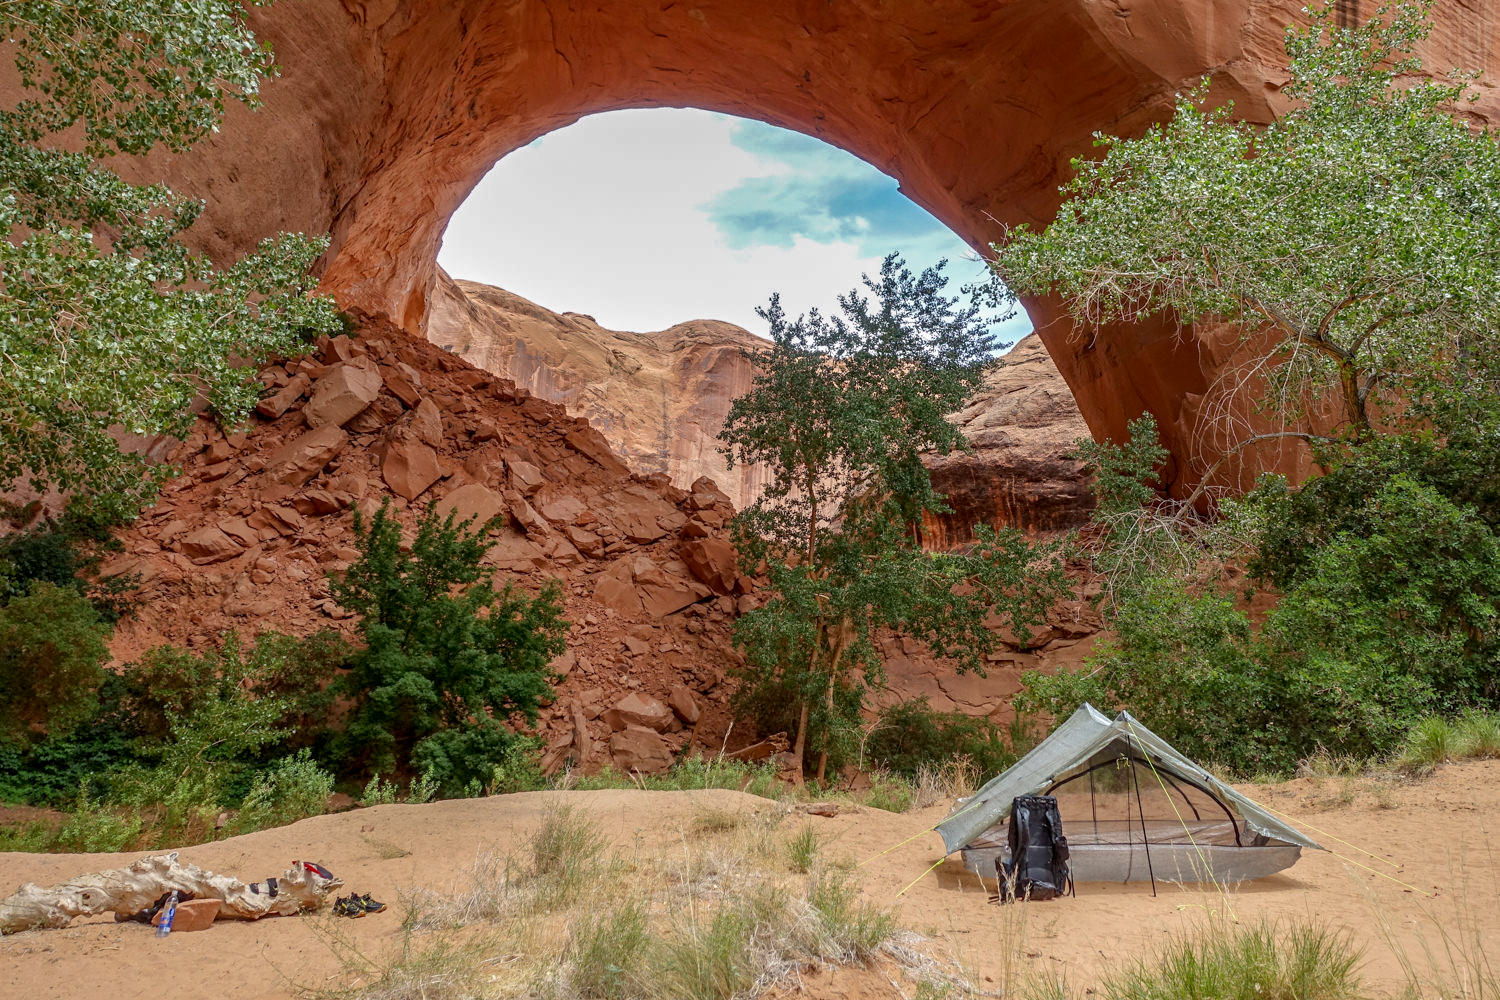 The Zpacks Duplex pitched near a red rock arch in Coyote Gulch